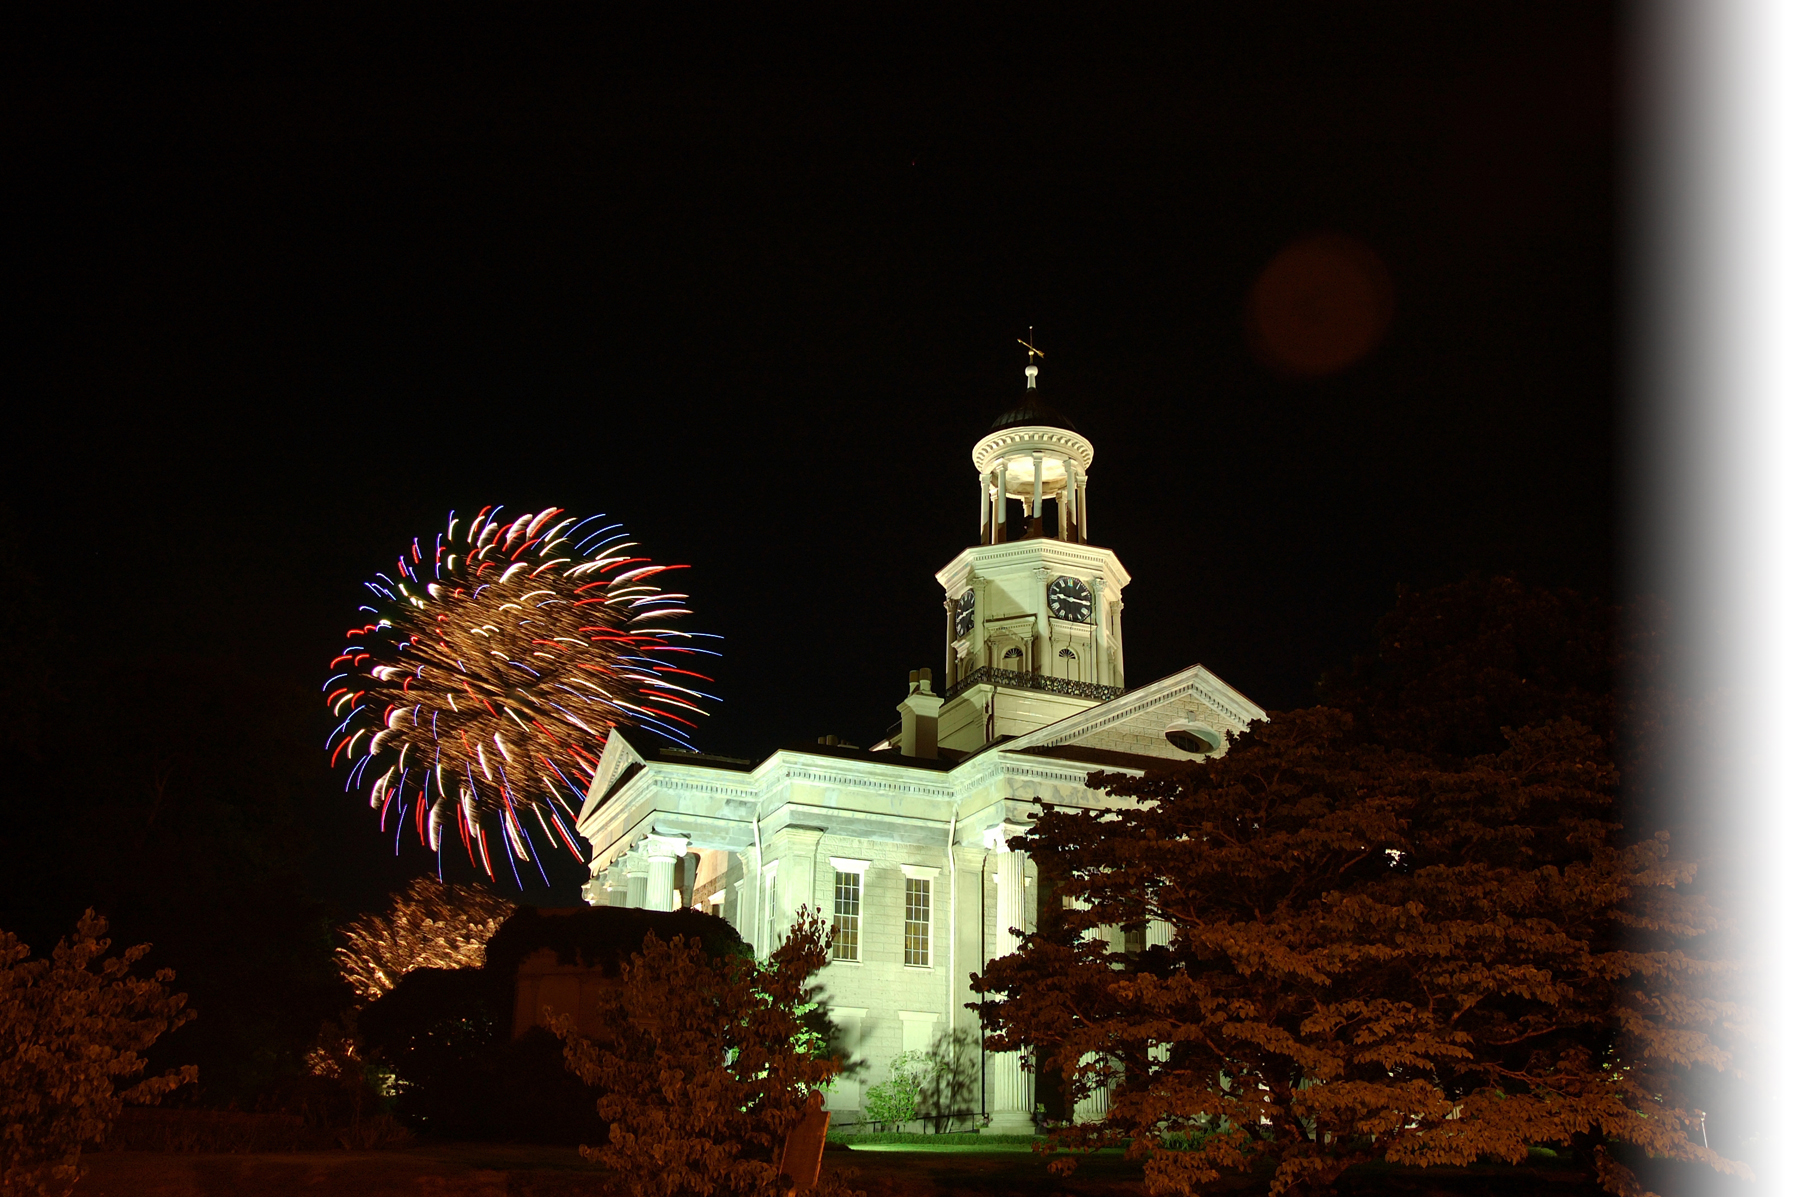 Courthouse Fireworks